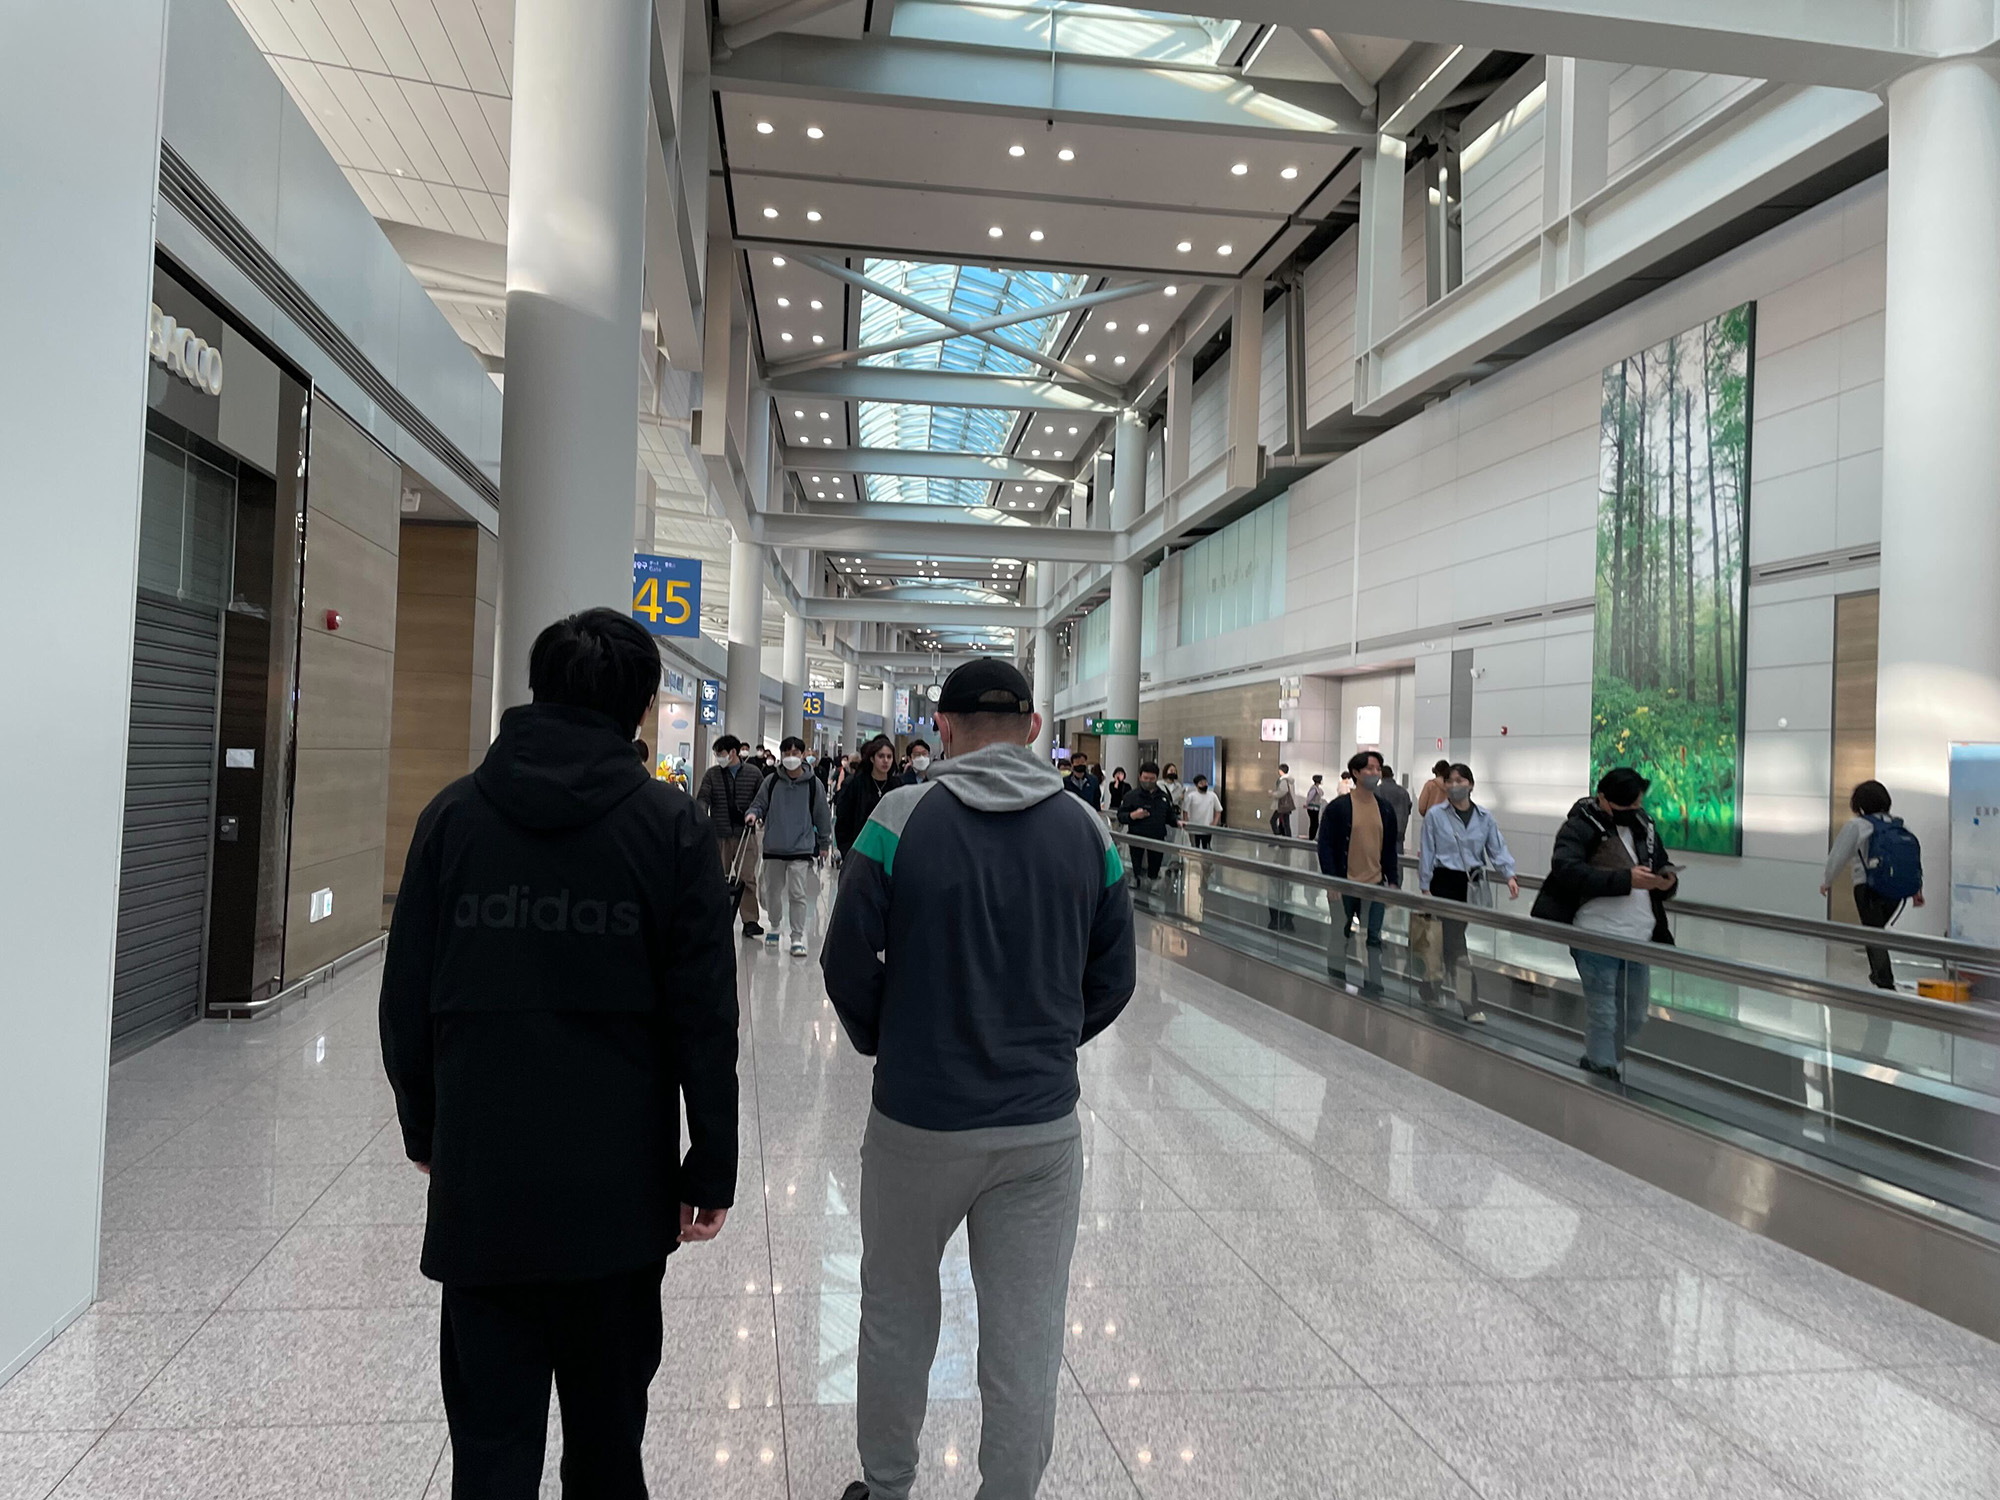 Two of the five Russians who arrived at South Korea's Incheon International Airport seeking refugee status after receiving their draft notice, but remain in limbo on January 24, in Incheon, South Korea.